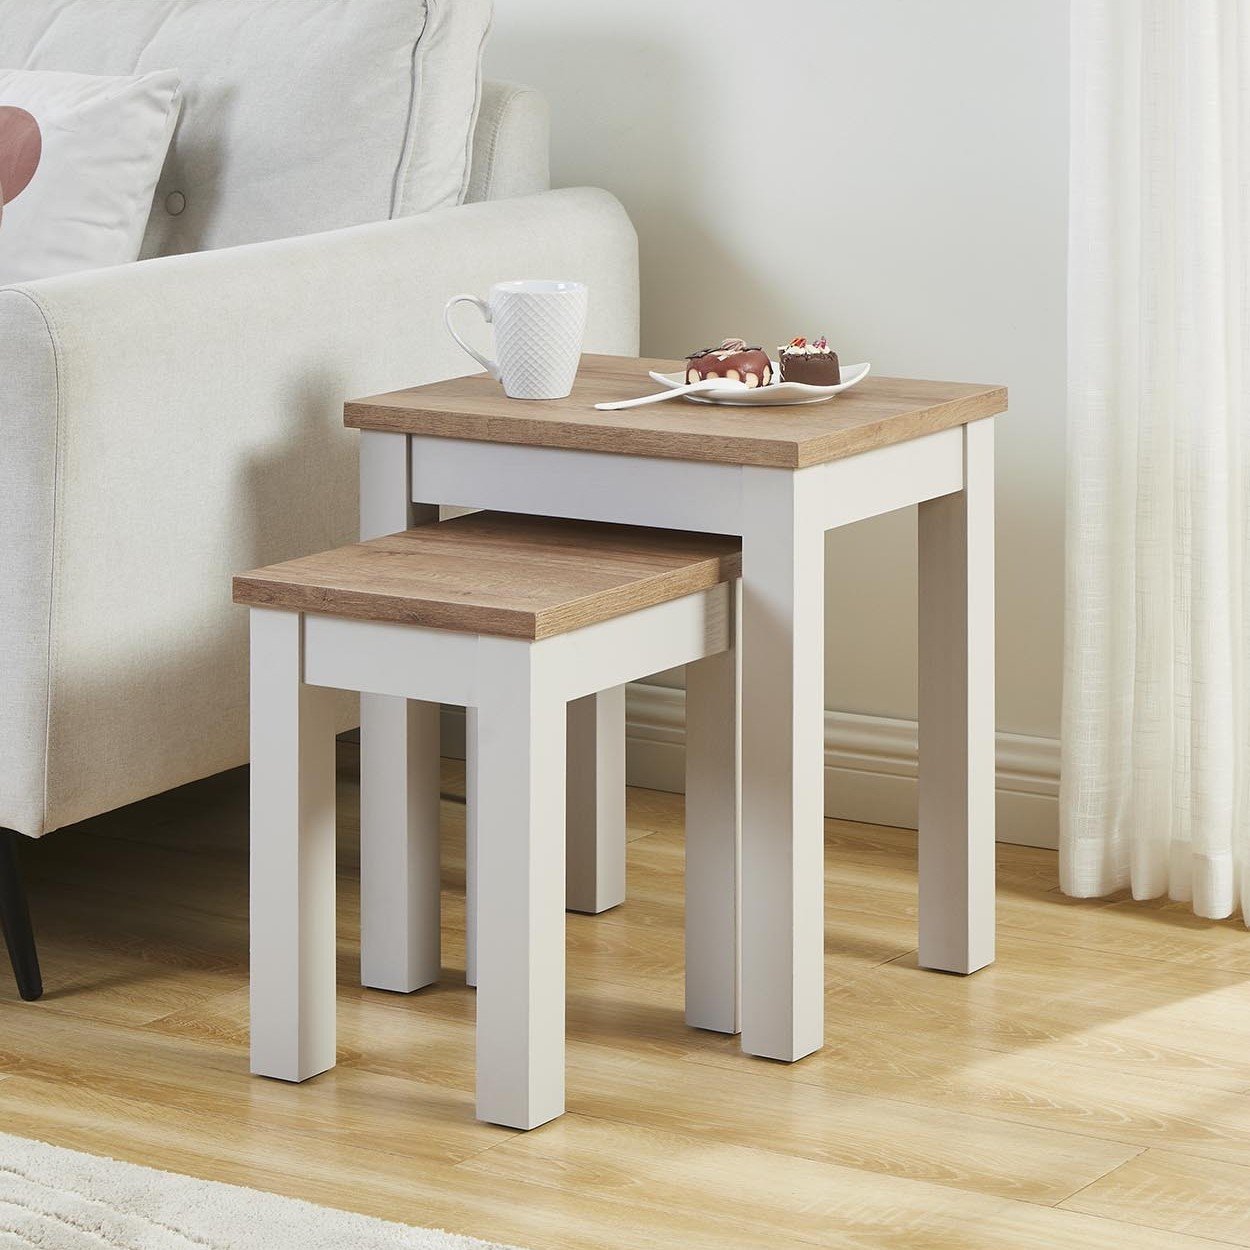 Cambridge Grey Nest of Tables Set of 2 Image 1